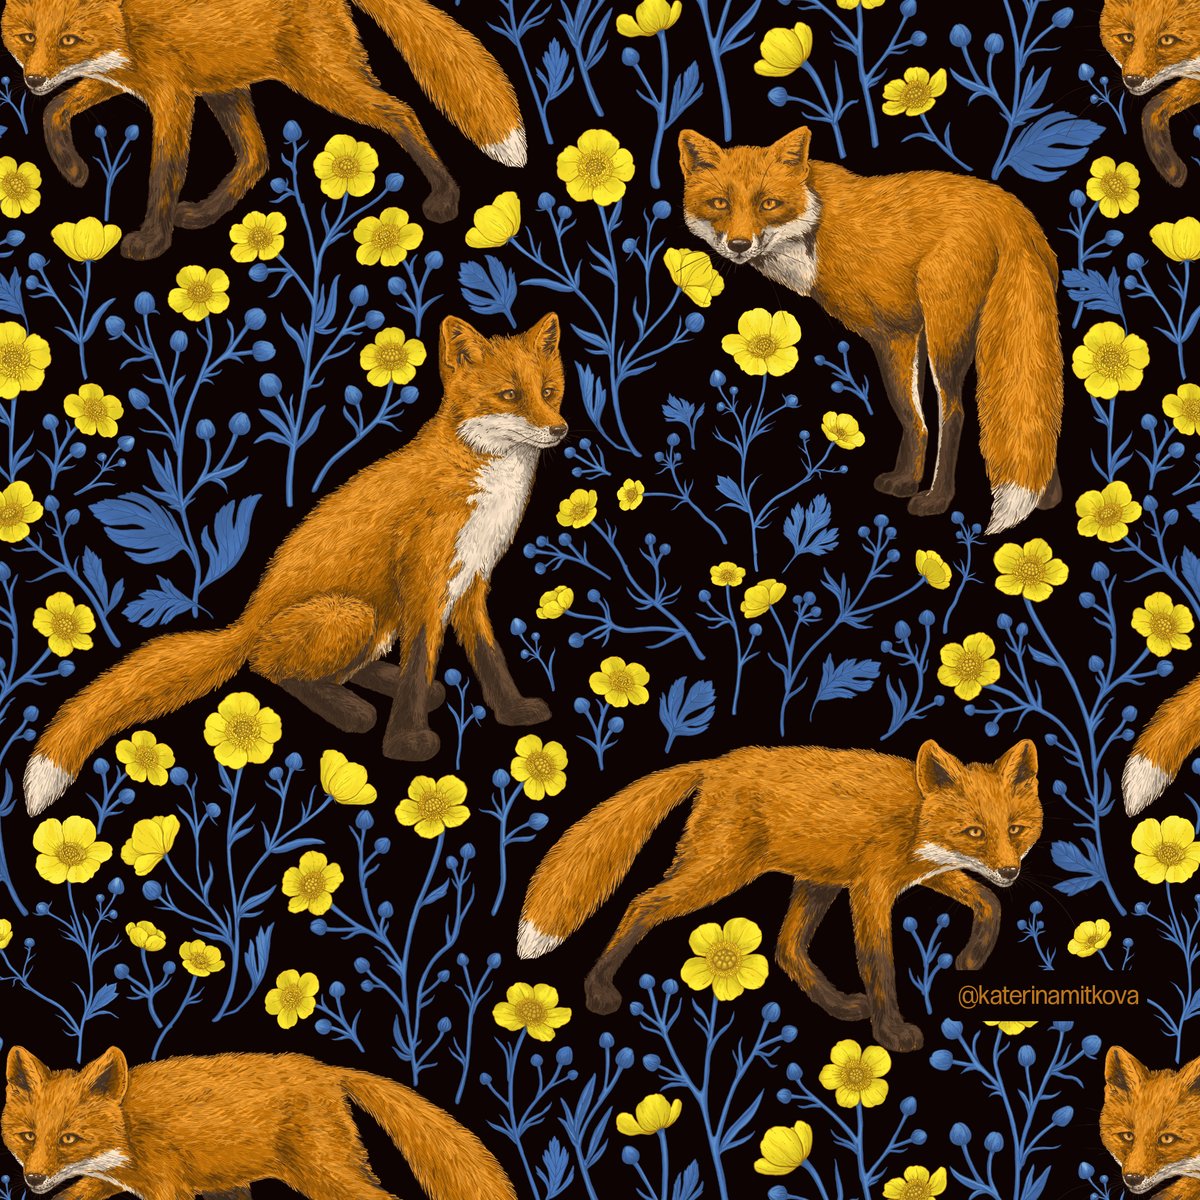 4 colorways of my newest pattern with Foxes and buttercups🎨🦊🌼
.
.
.
#pattern #foxesandflowers #surfacepatterndesign #spoonflower #zazzle #redbubble #homedecor #fabriclove #foxdesign #buttercup  #artoftheday  #textiledesigner #patterndesigner #Photoshop #patternpreview